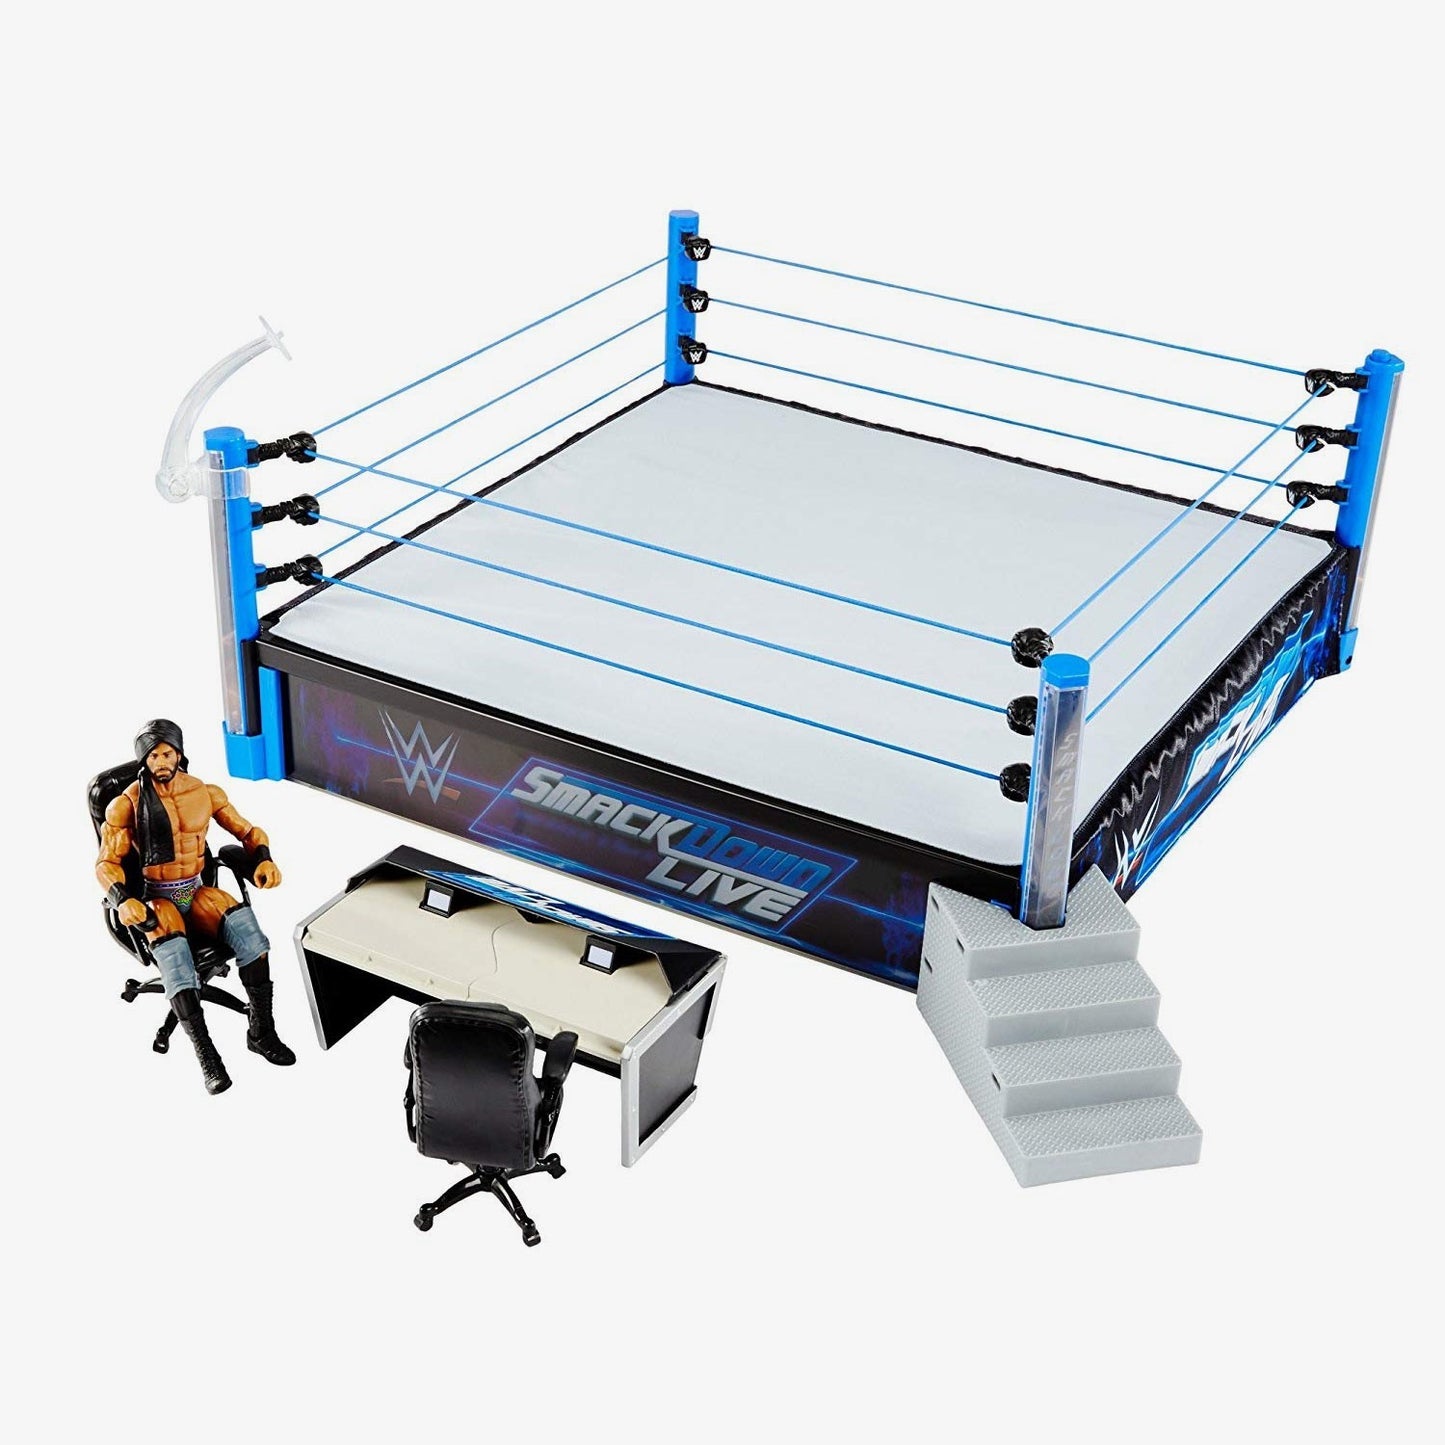 WWE SmackDown Main Event Real Scale Ring Playset (Includes Jinder Mahal)